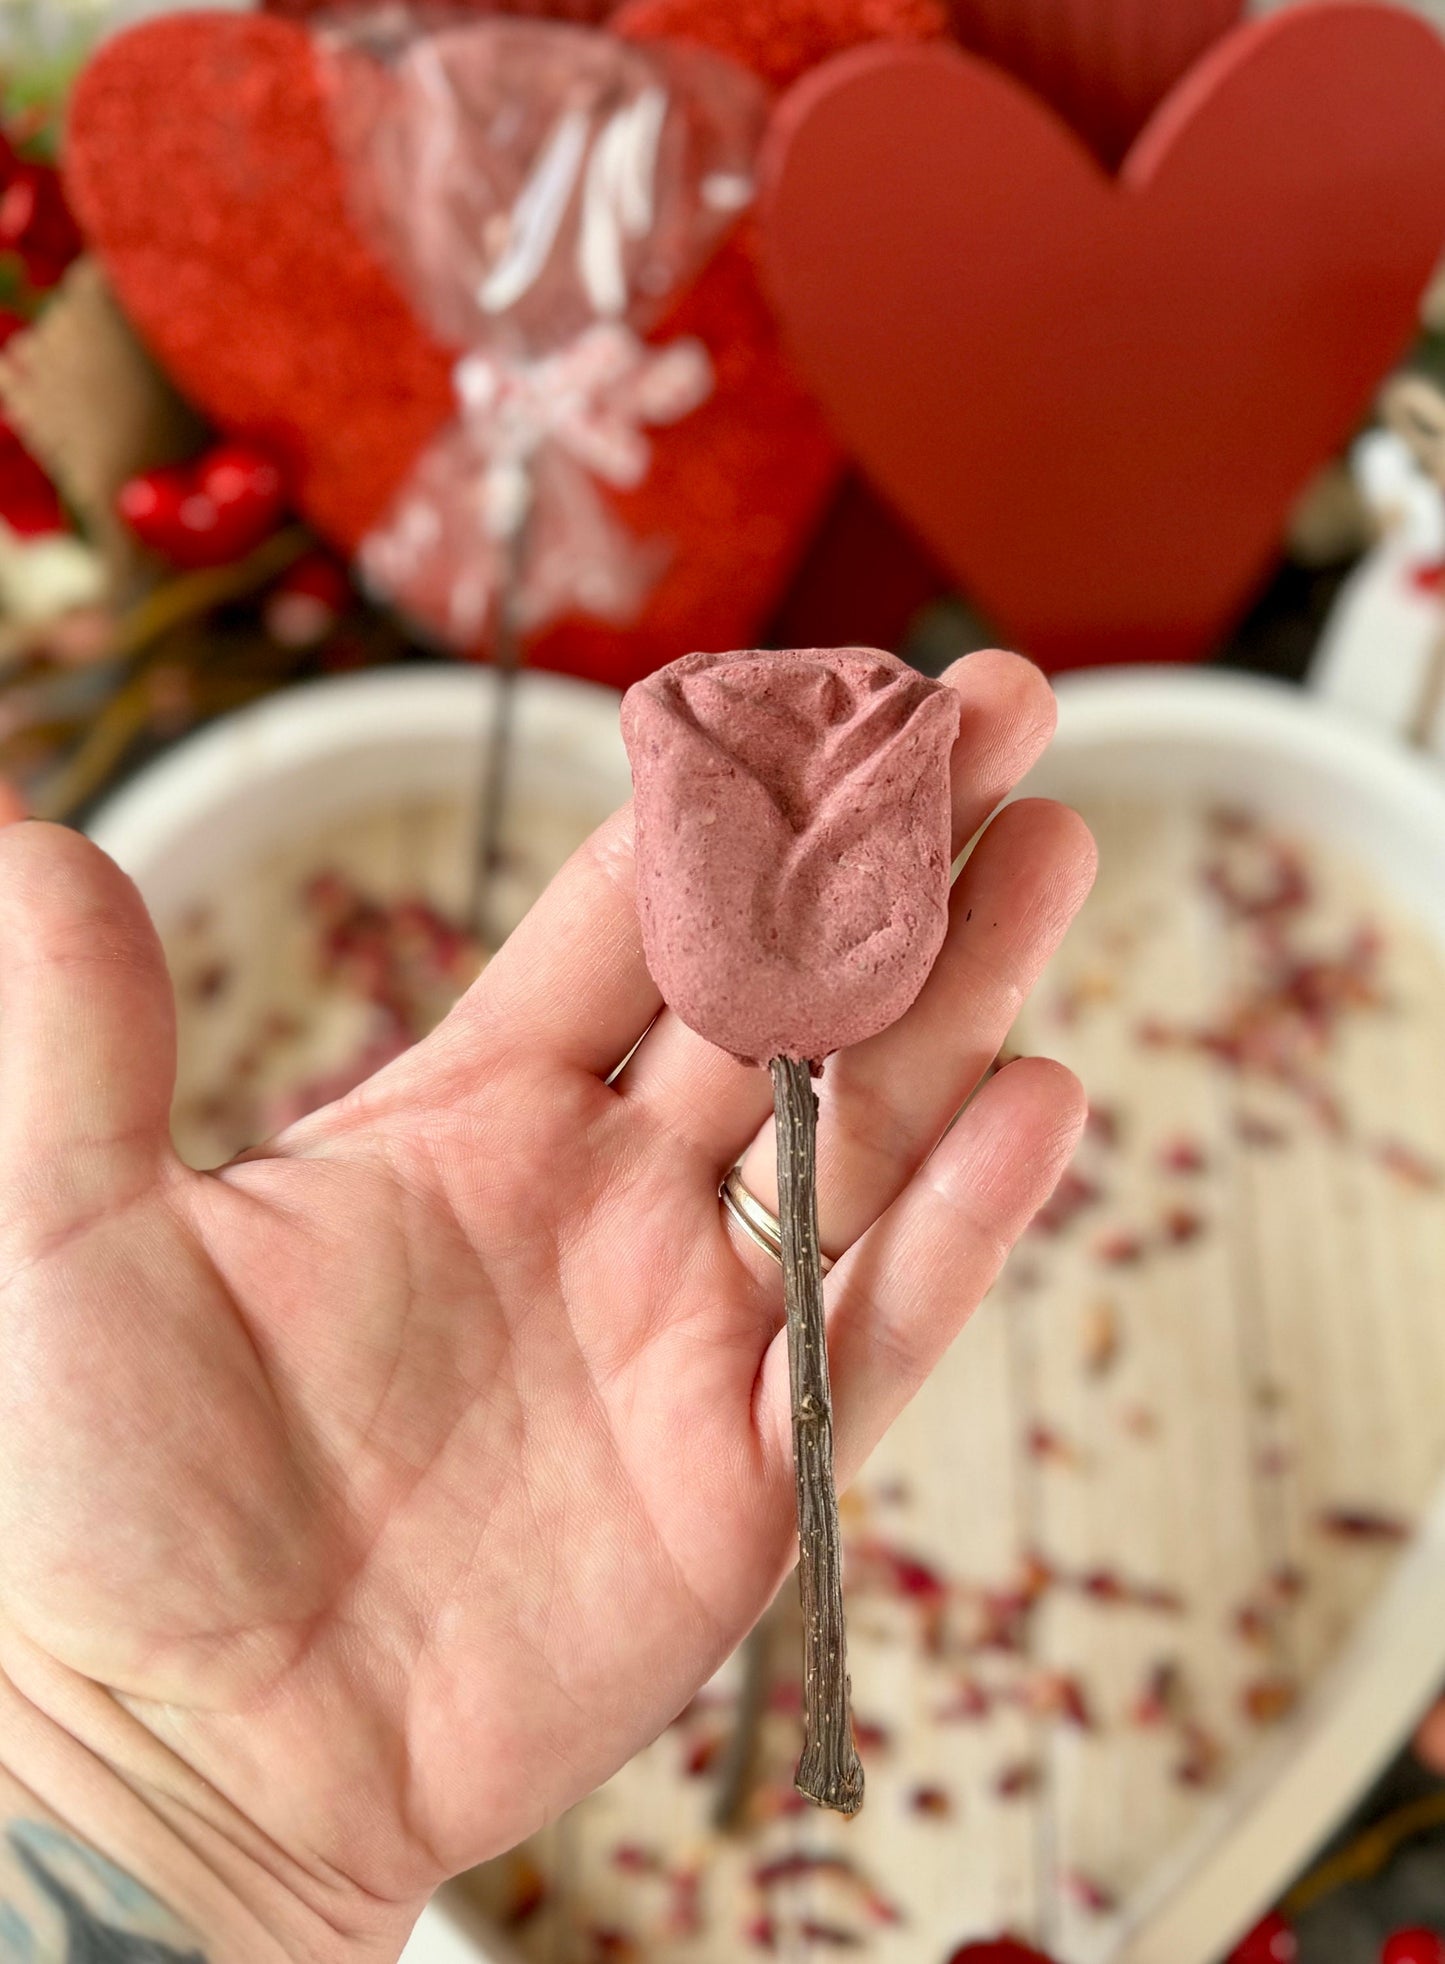 Rose Valentine Pops | Crunchy Botanical Treat & Chew for Rabbits, Guinea Pigs and Small Pets, All Natural, Organic and Guilt Free